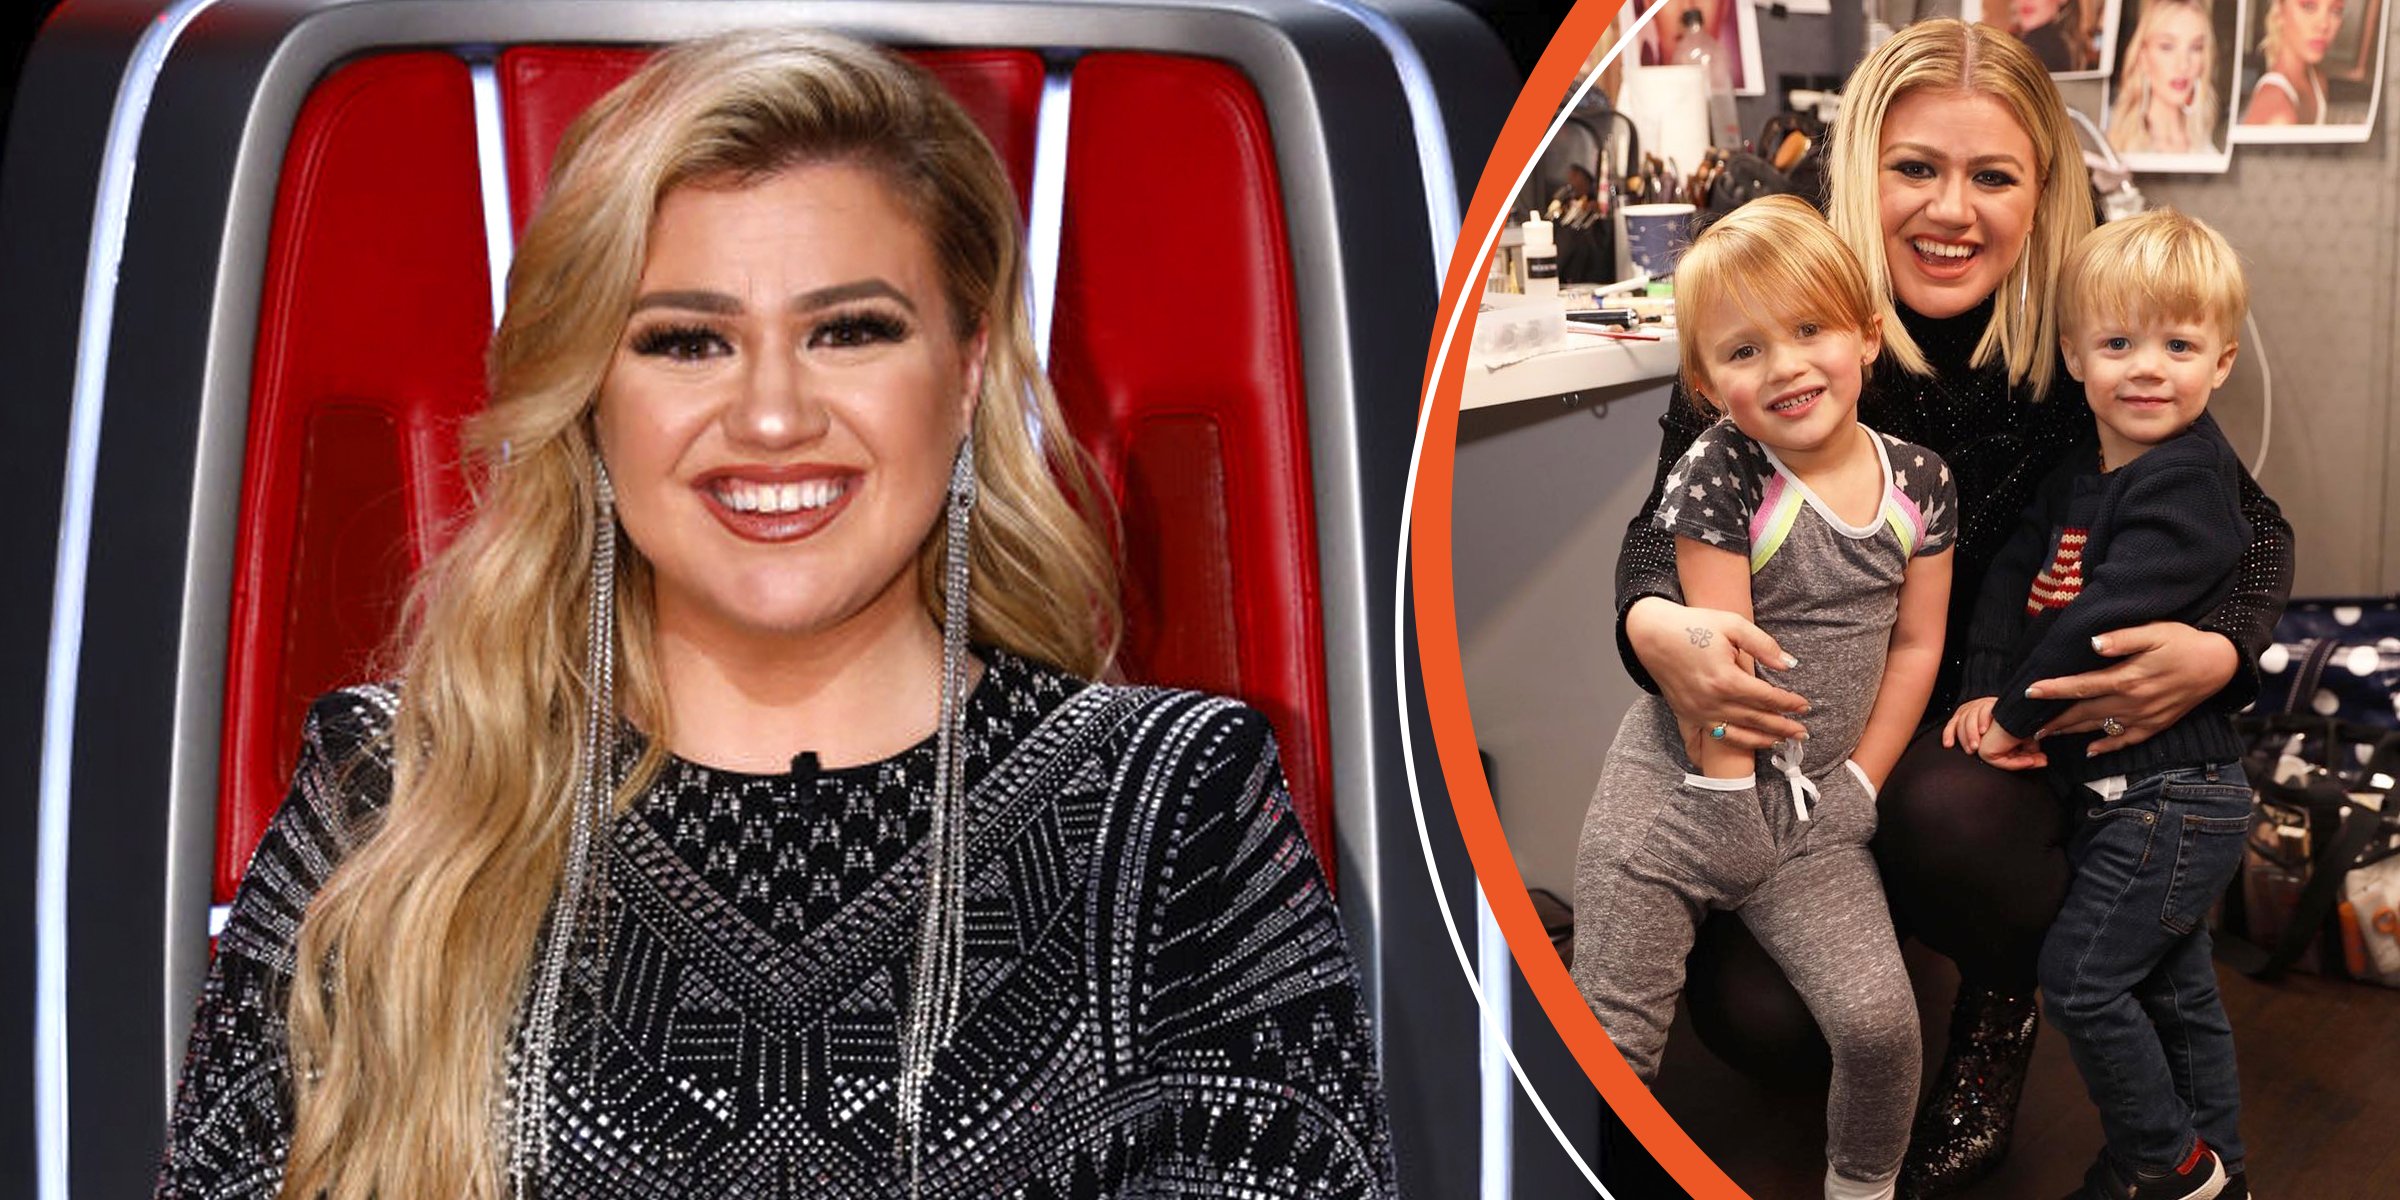 Kelly Clarkson, River Rose and Remington Alexander. | Source: Instagram/kellyclarkson | Getty Images